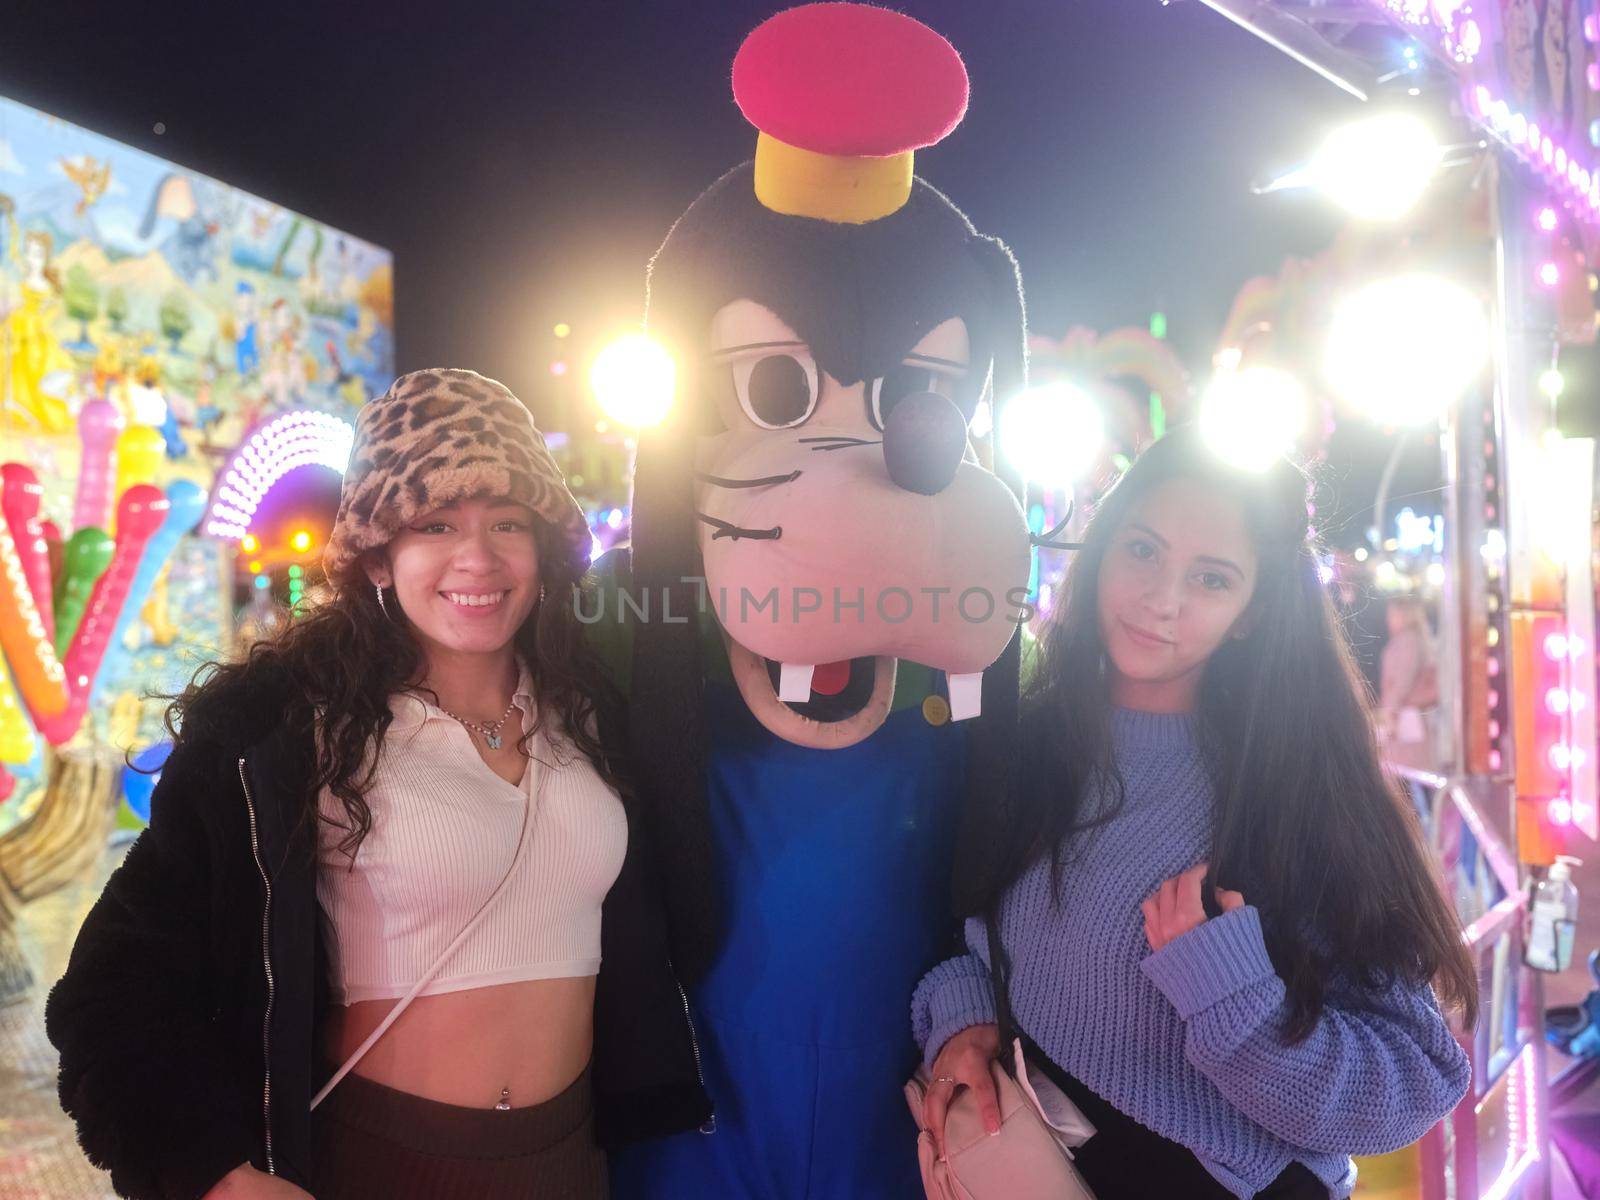 Portrait of two women standing next to a actor dressing like Goofy dog in a night fair